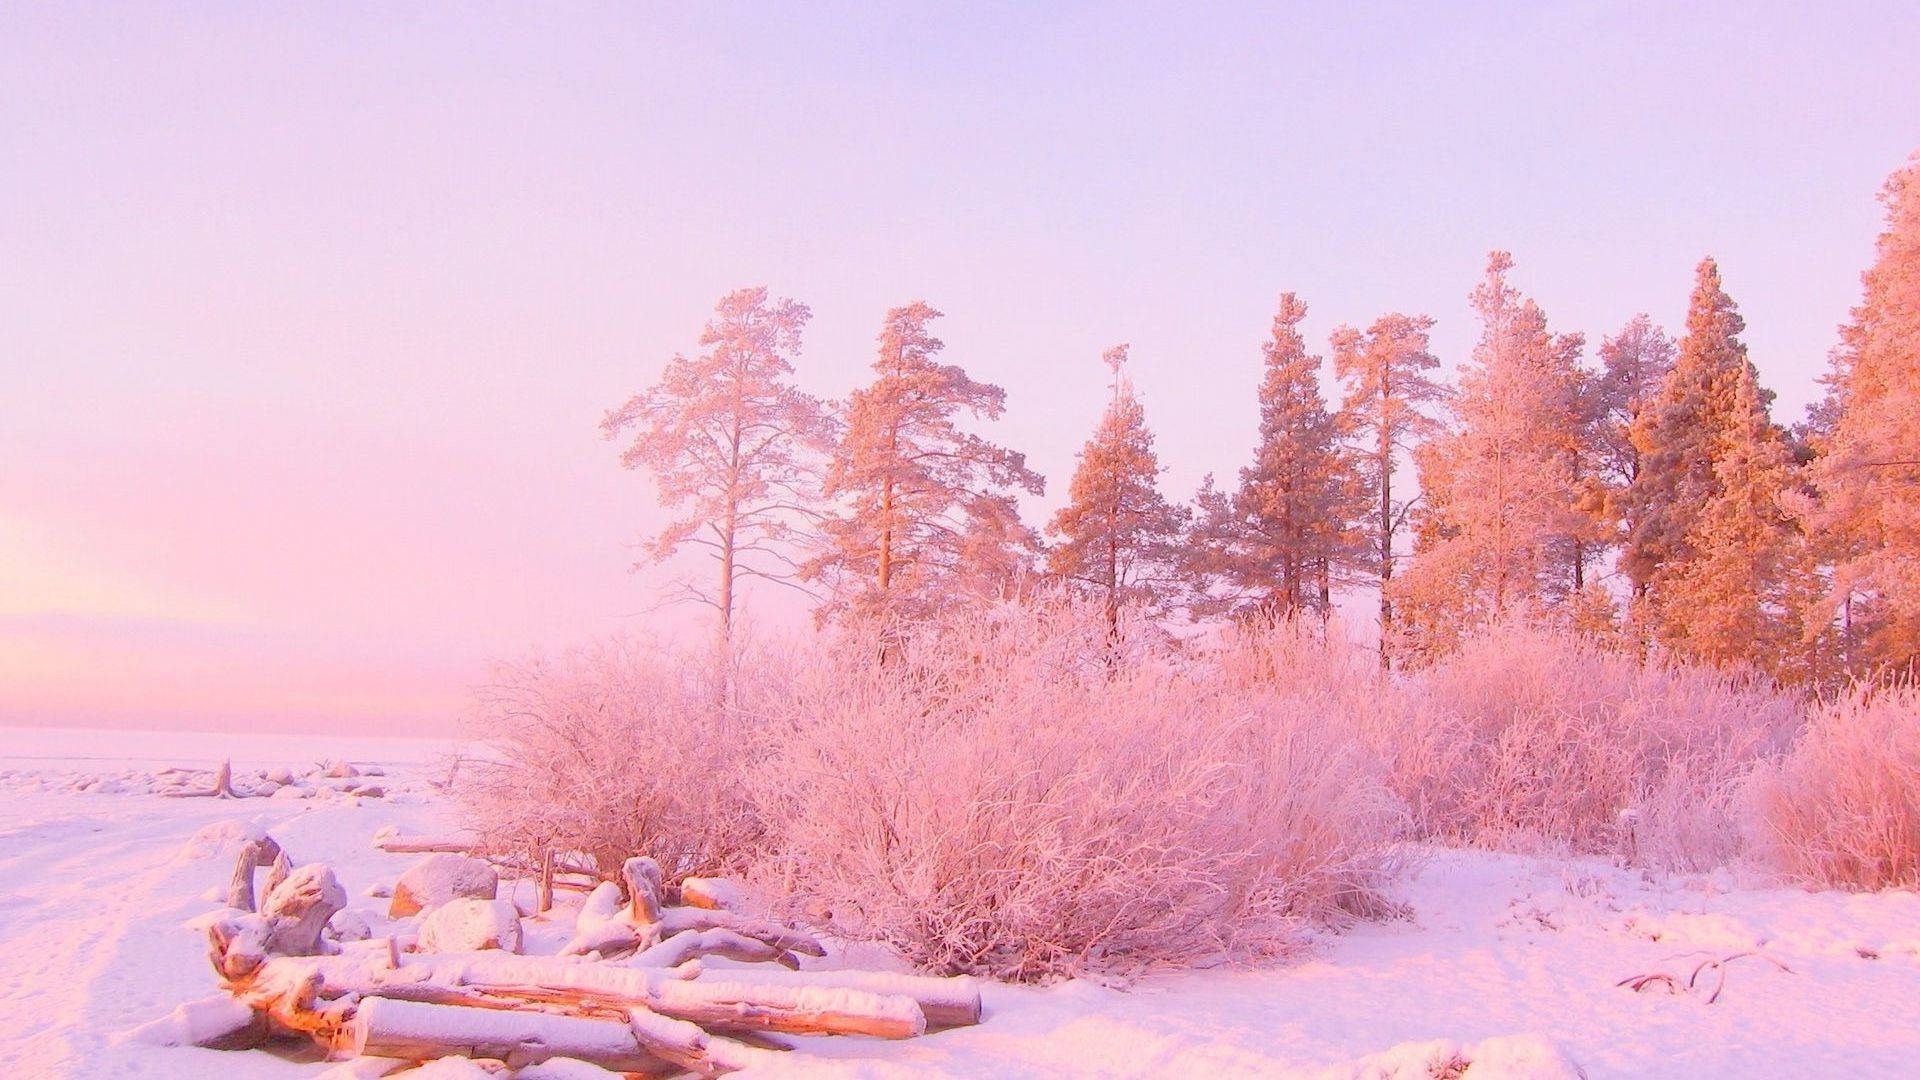 A snow covered forest with pink sky in the background - Landscape